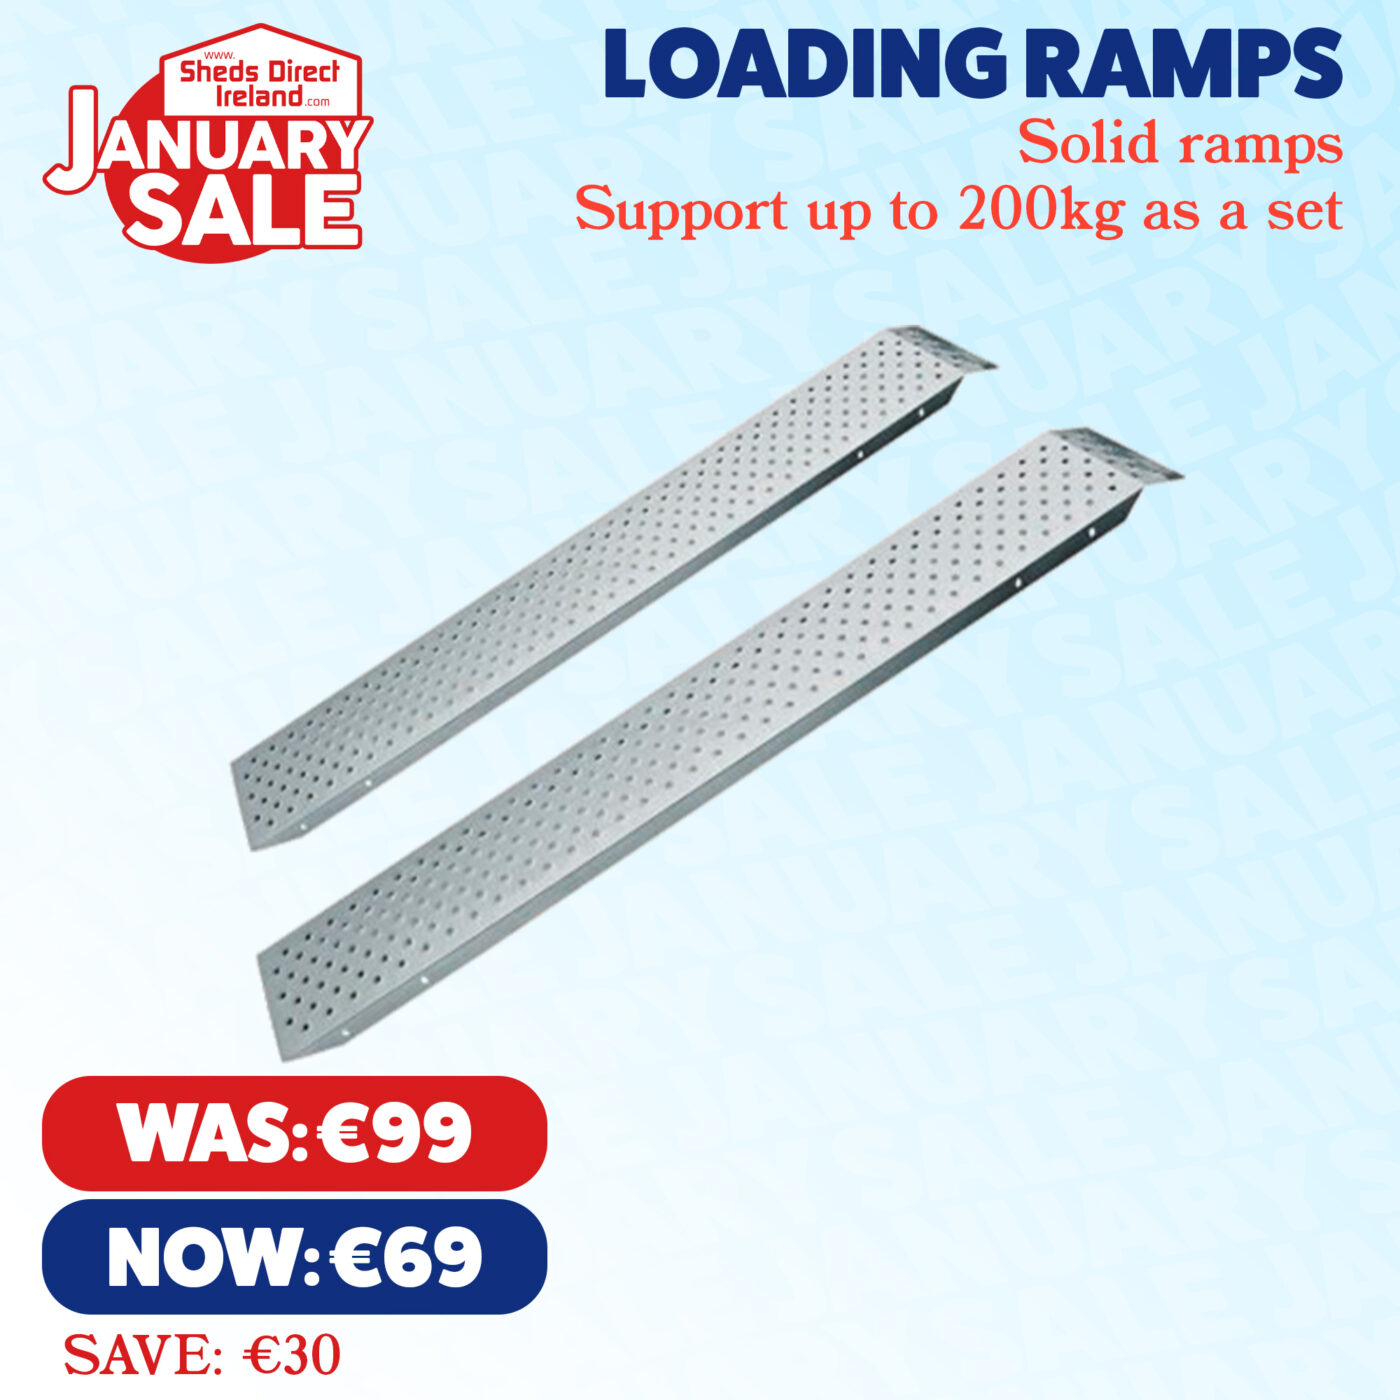 January Sale - solid loading ramps